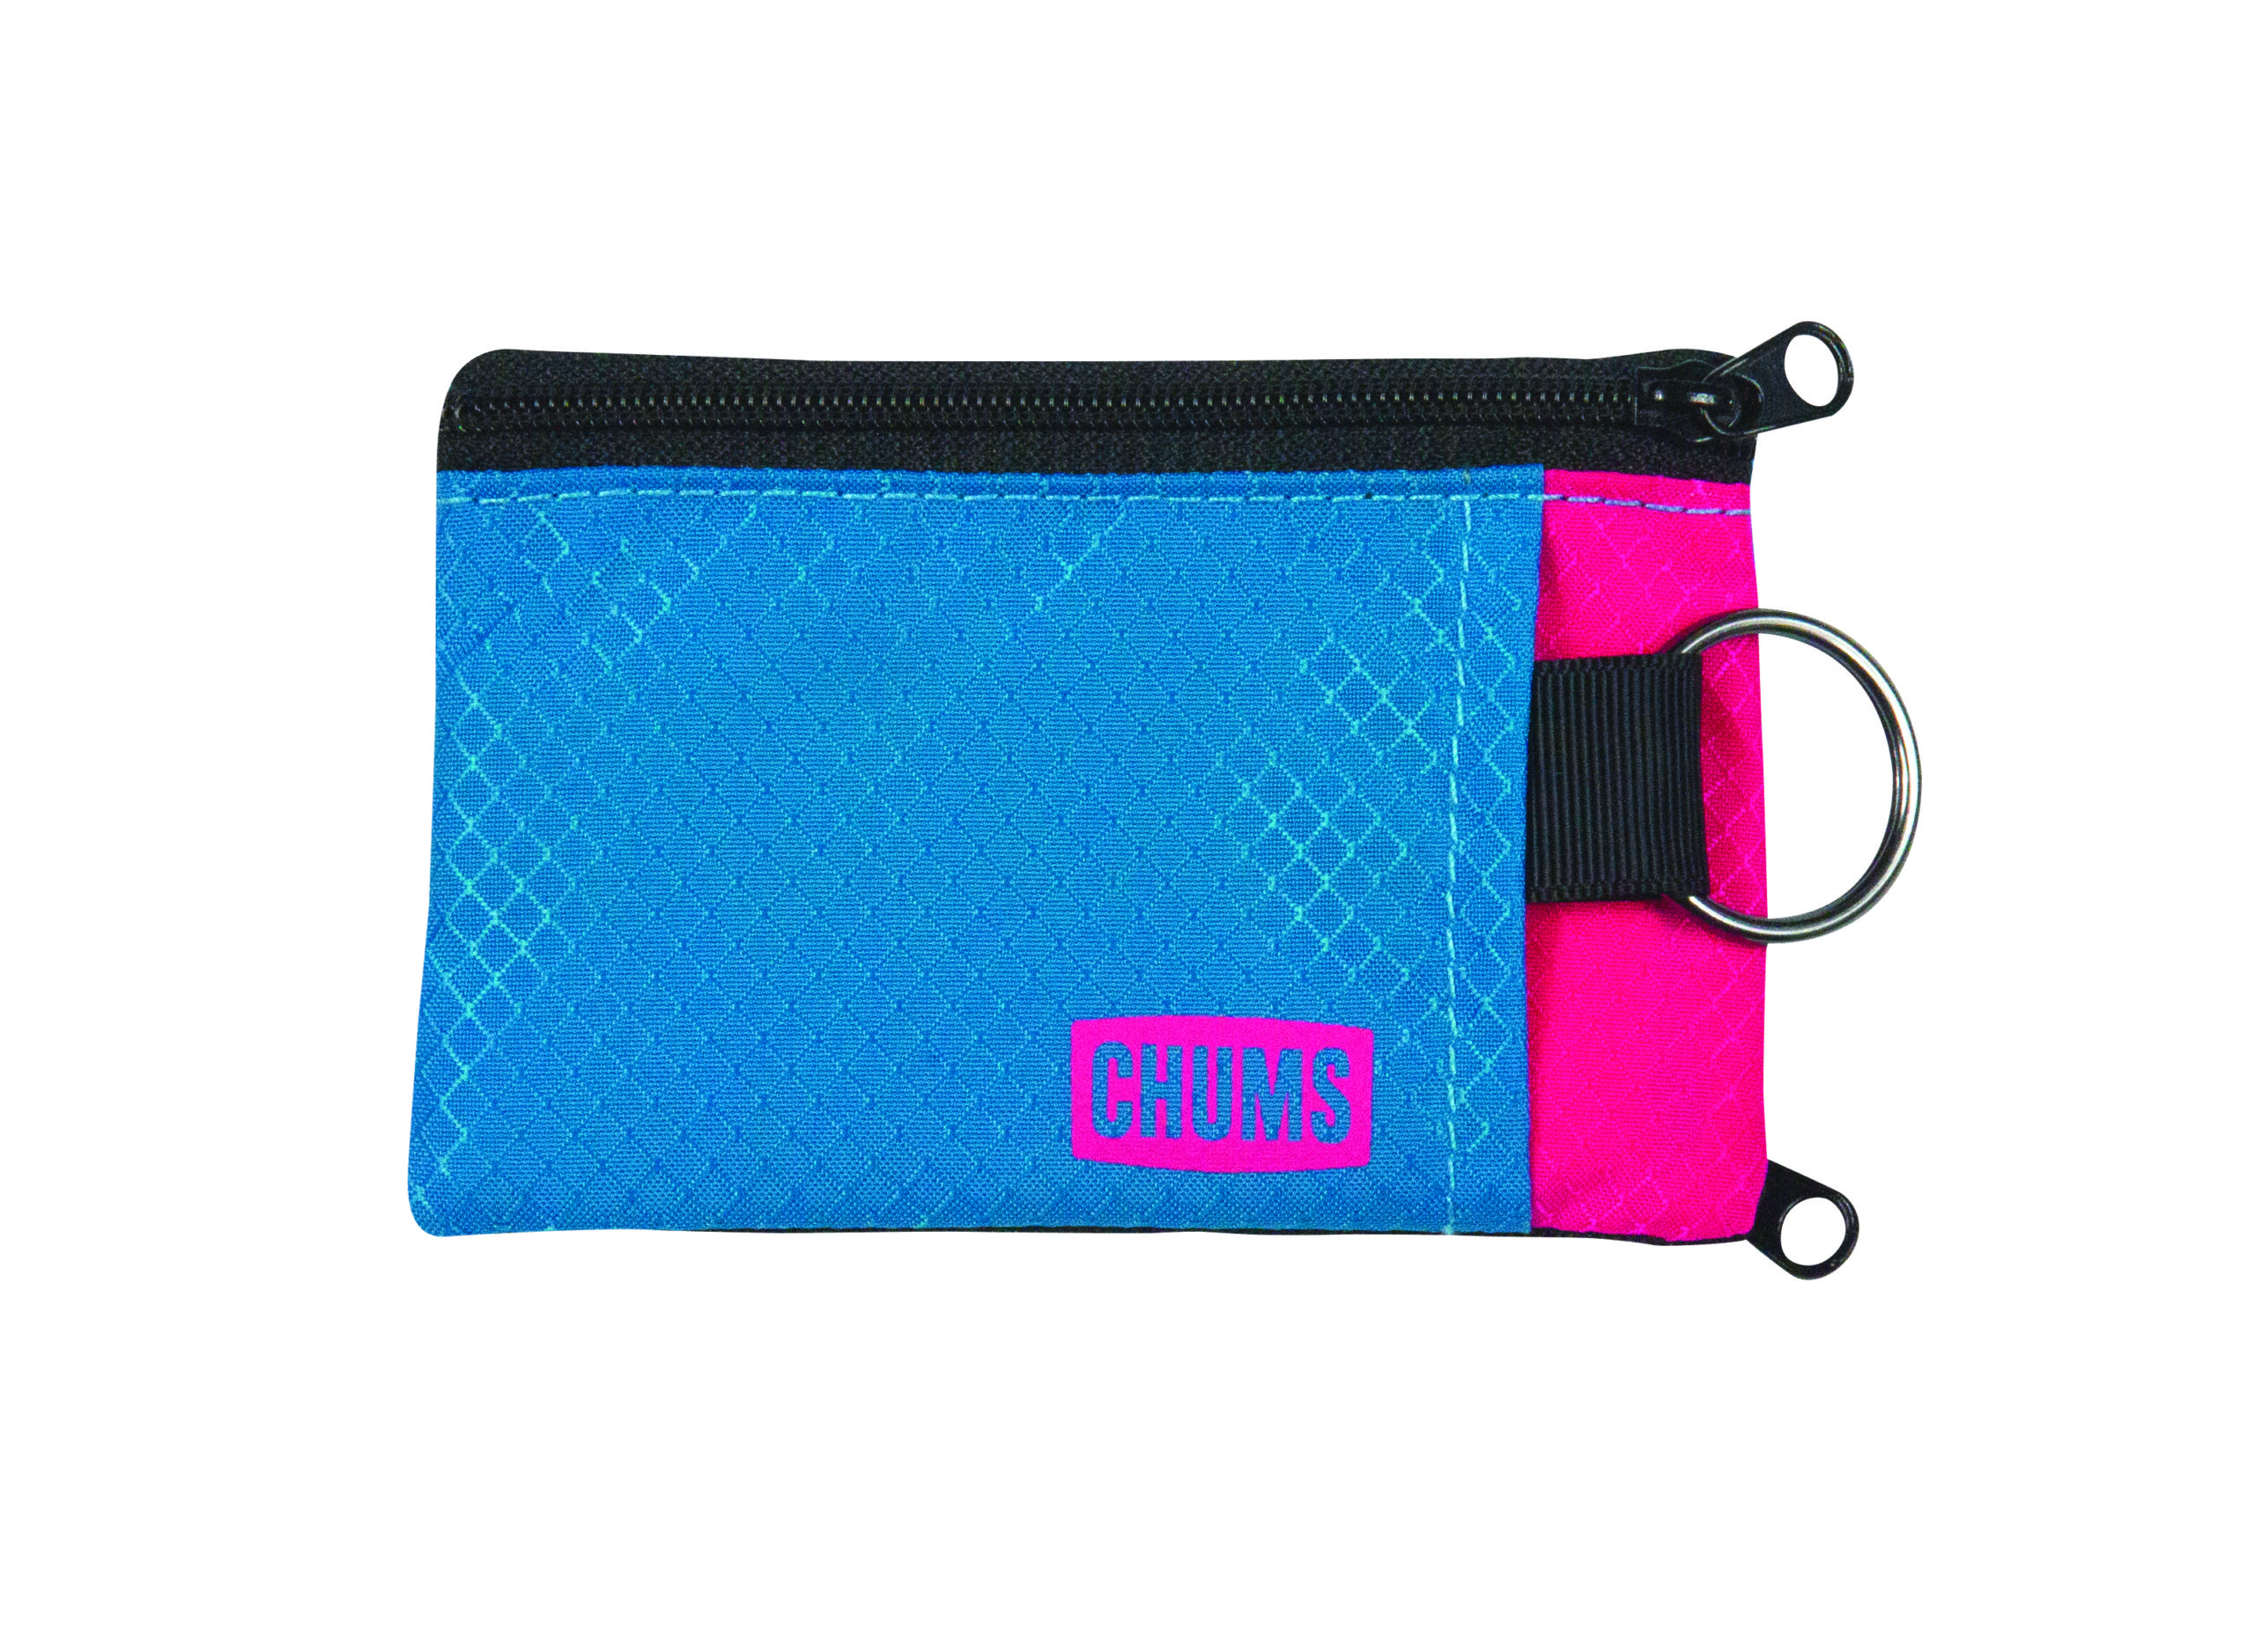 Chums Surfshorts Wallet - Chums Accessories, Chums Wallets & Accessory ...